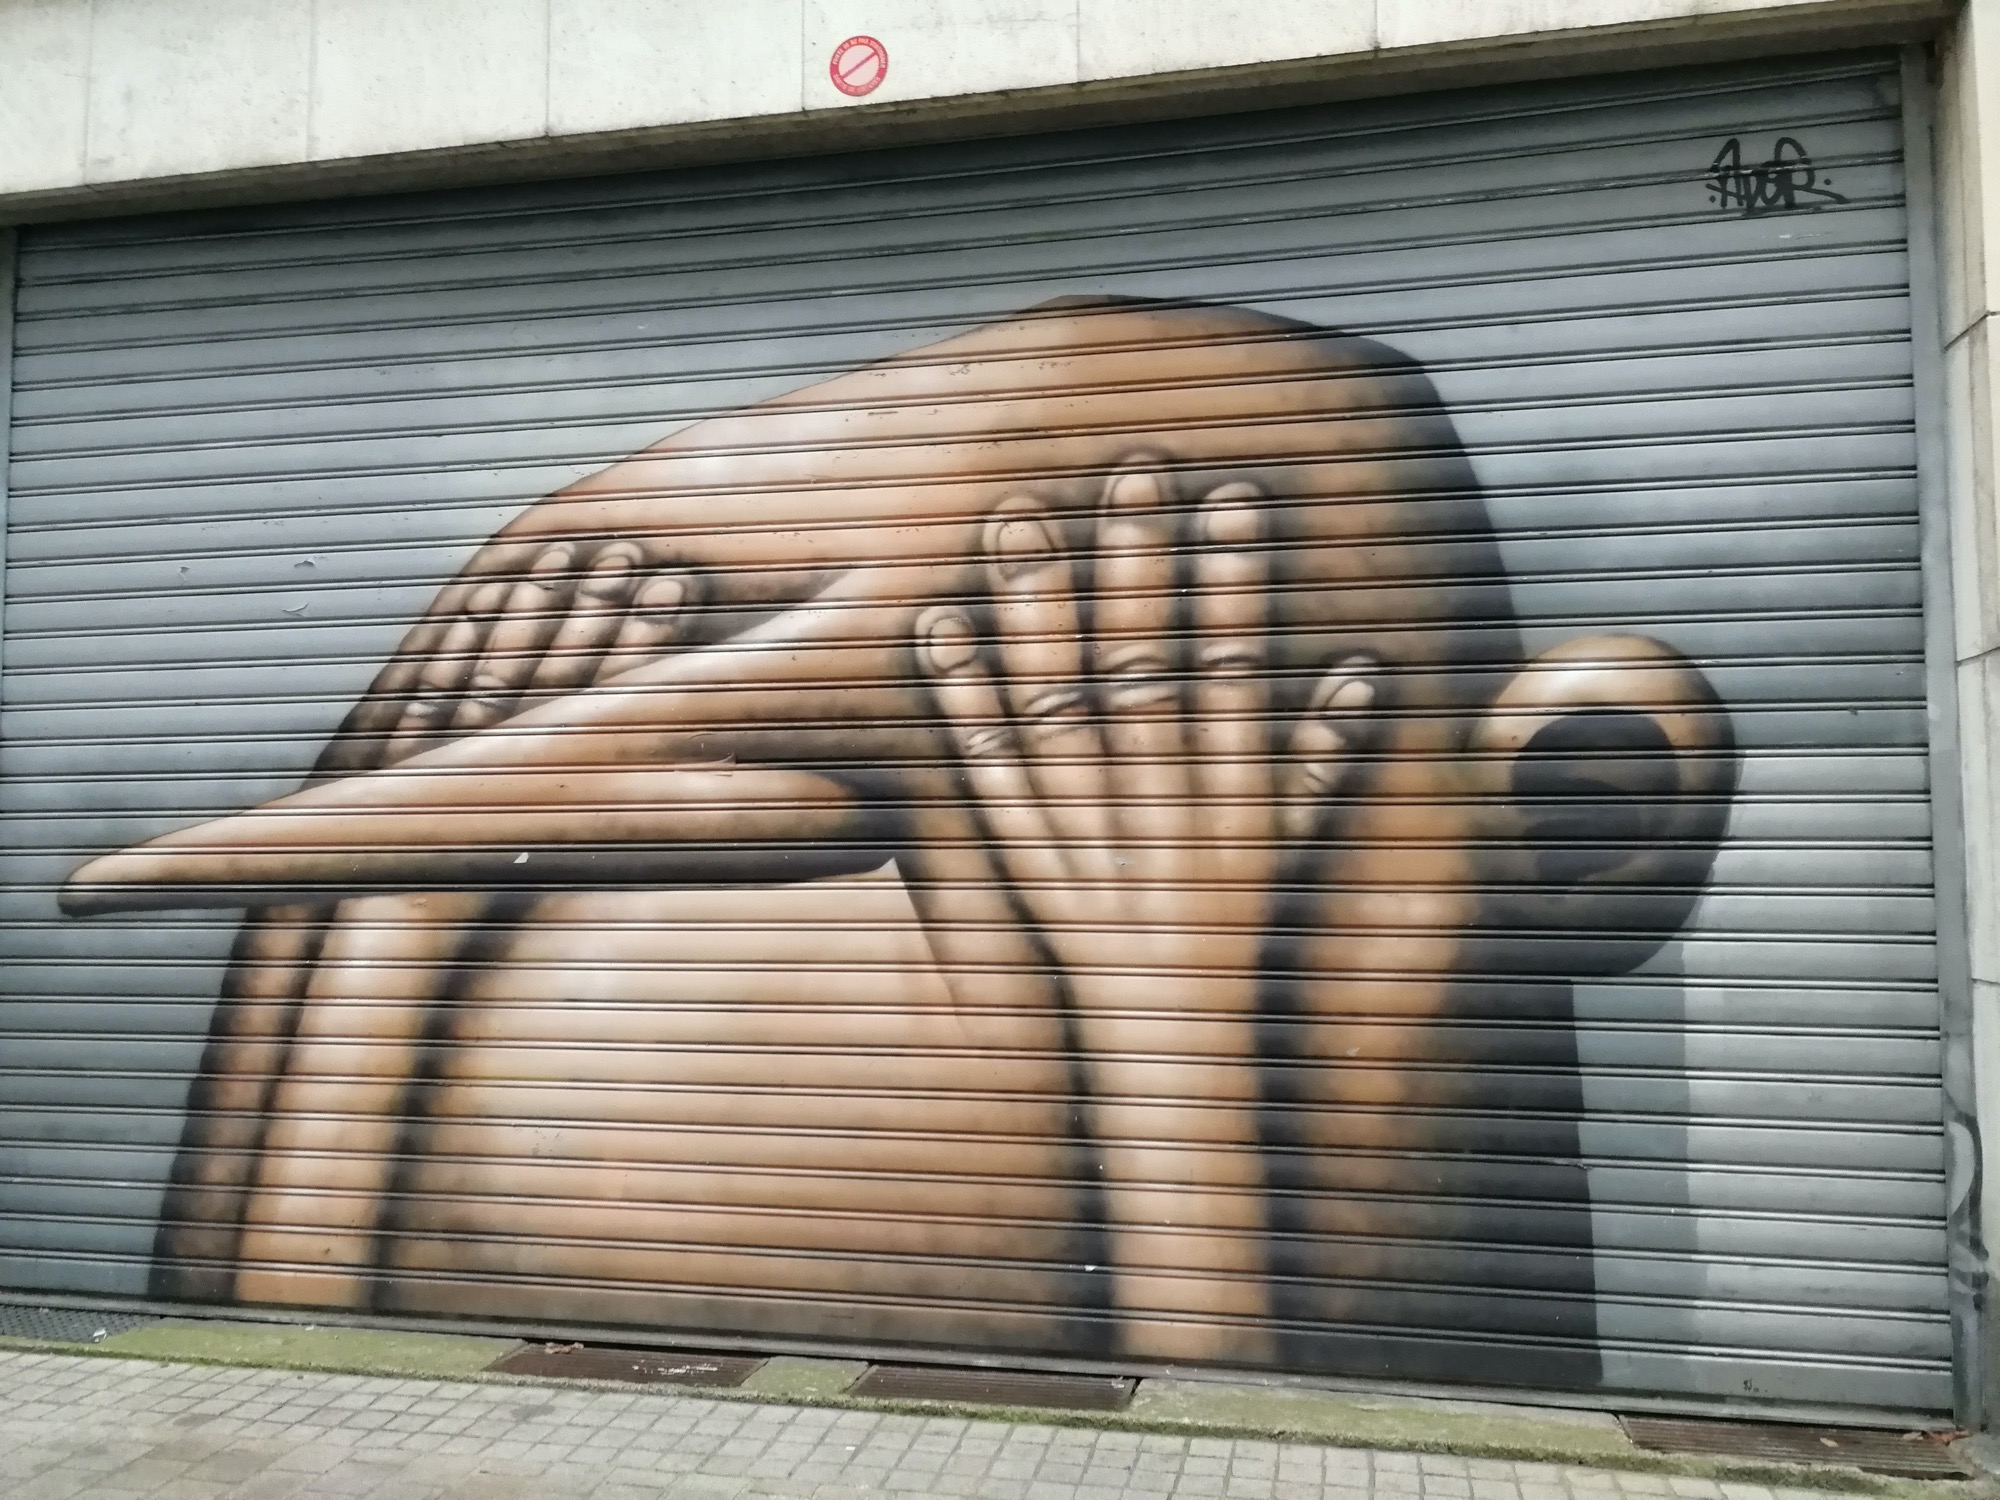 Graffiti 589  by the artist Ador captured by Rabot in Nantes France